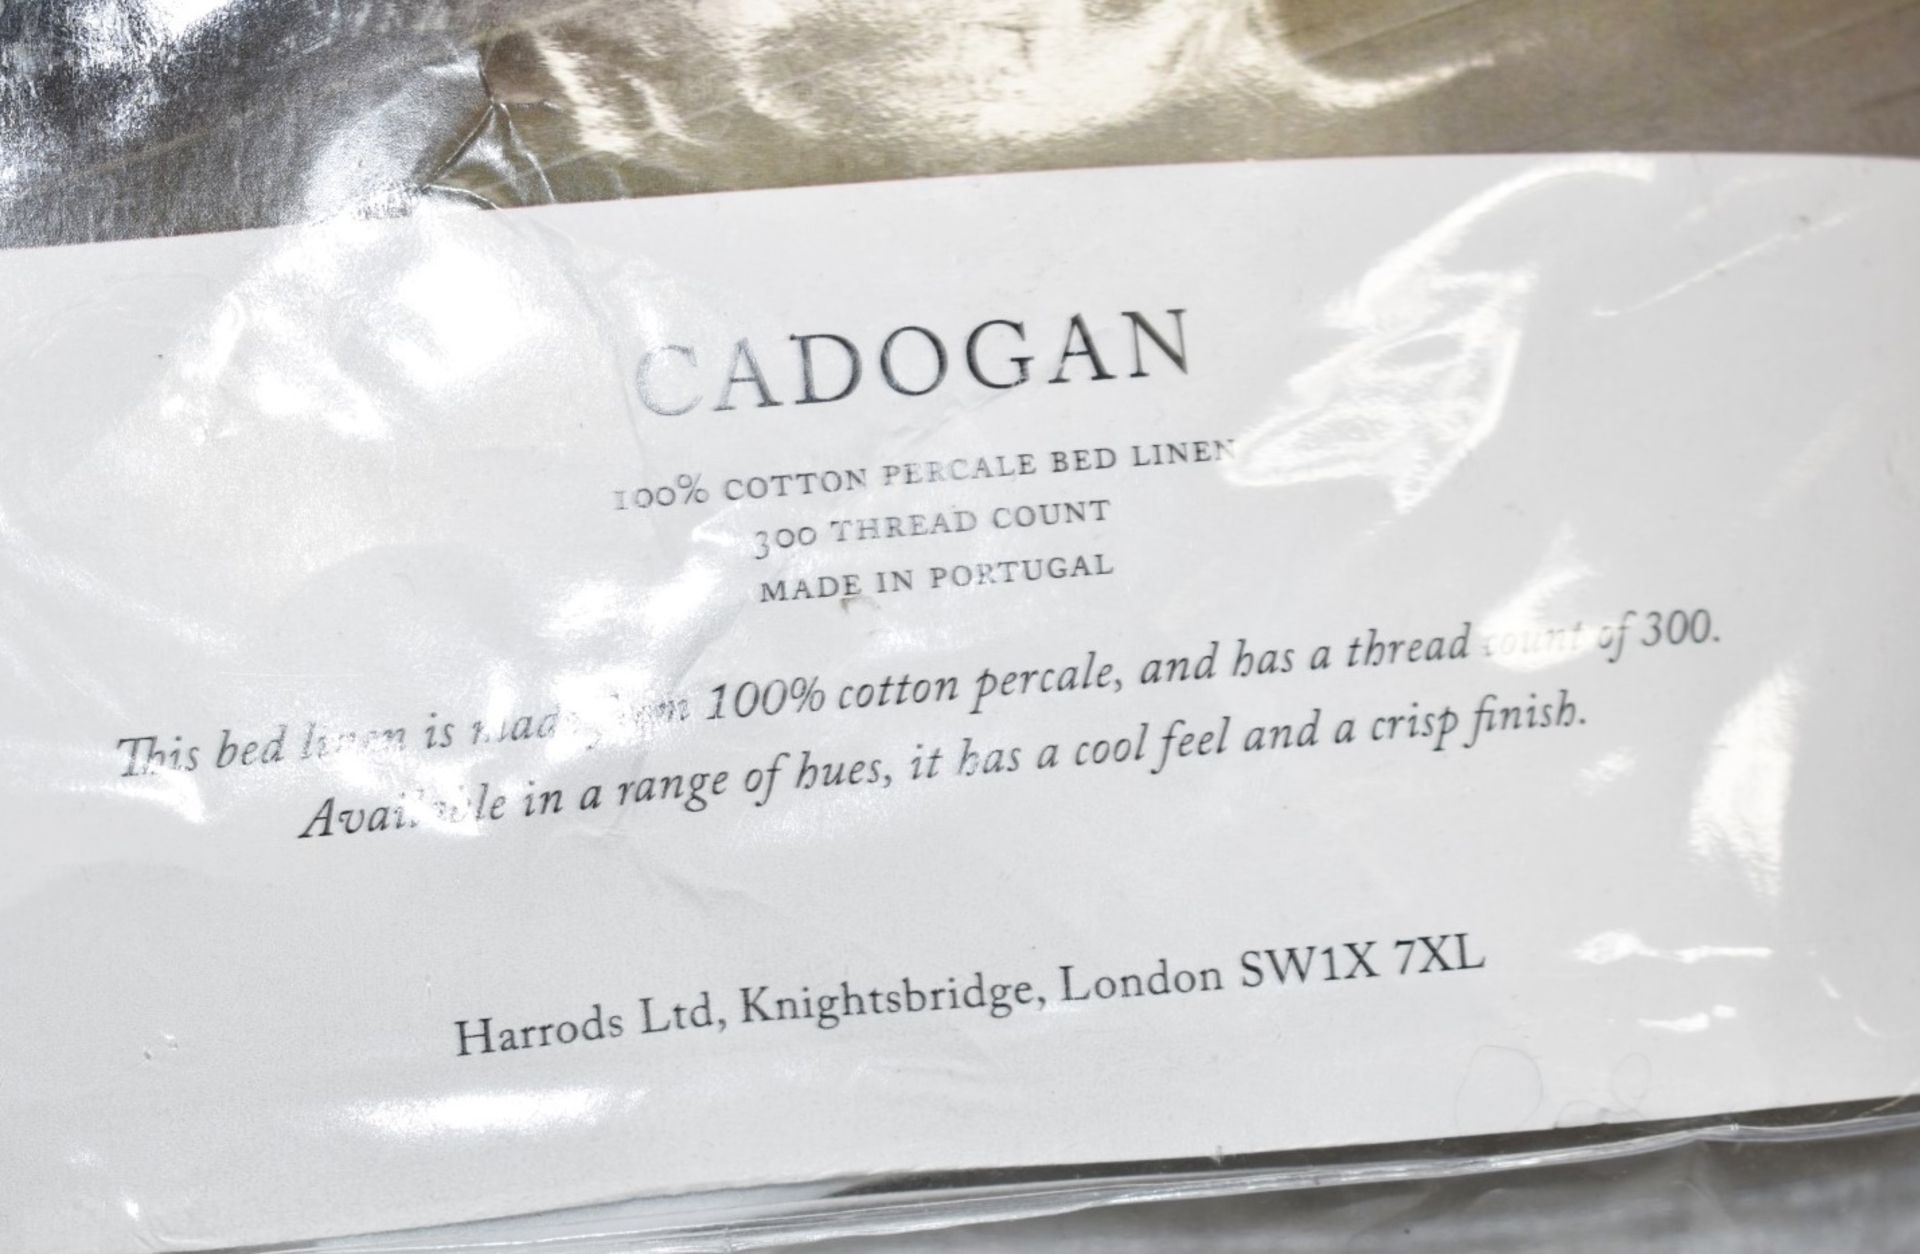 1 x HARRODS OF LONDON 'Cadogan' King Duvet Cover Set, With Pillow Cases - Original Price £239.00 - Image 9 of 9